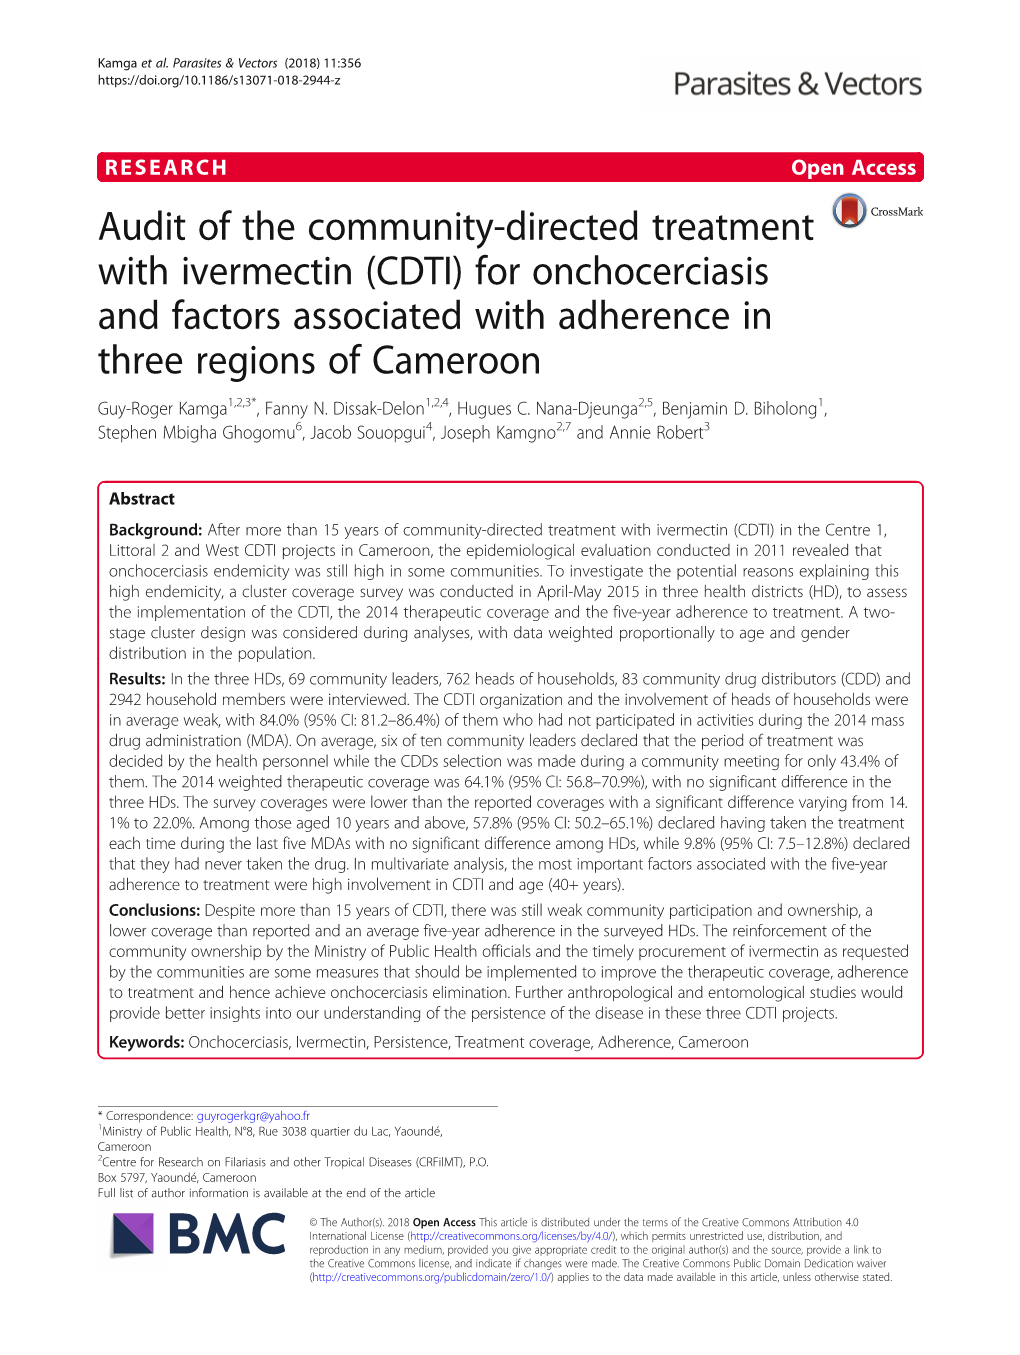 Audit of the Community-Directed Treatment with Ivermectin (CDTI)